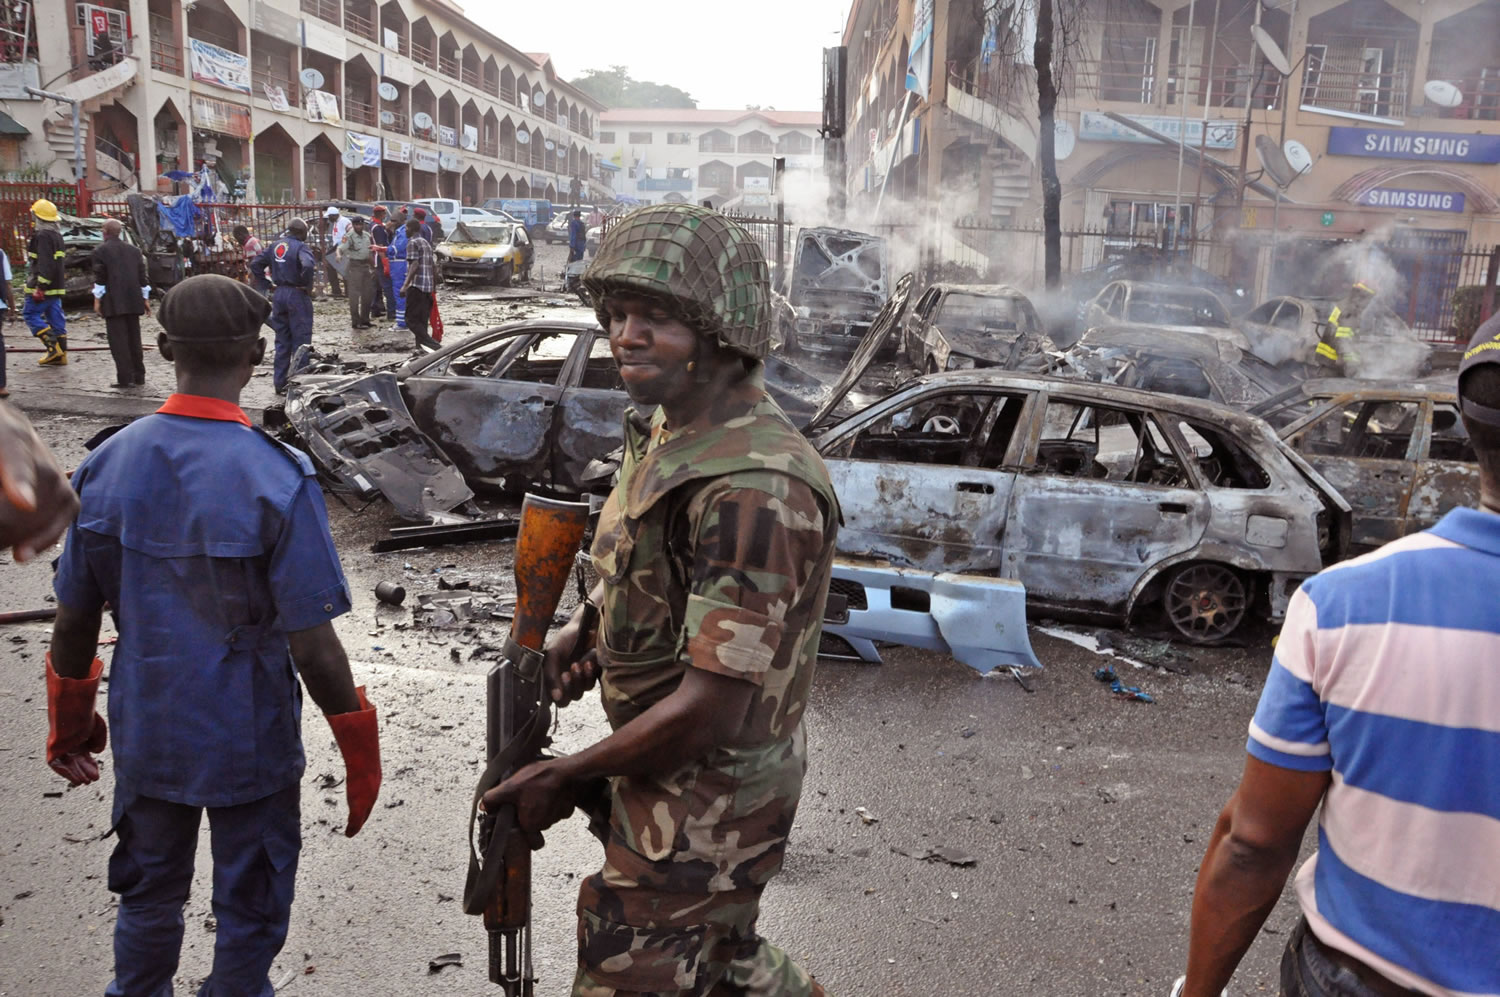 A Nigerian soldier walks past the scene of an explosion at a shopping mall Wednesday in Abuja, Nigeria.